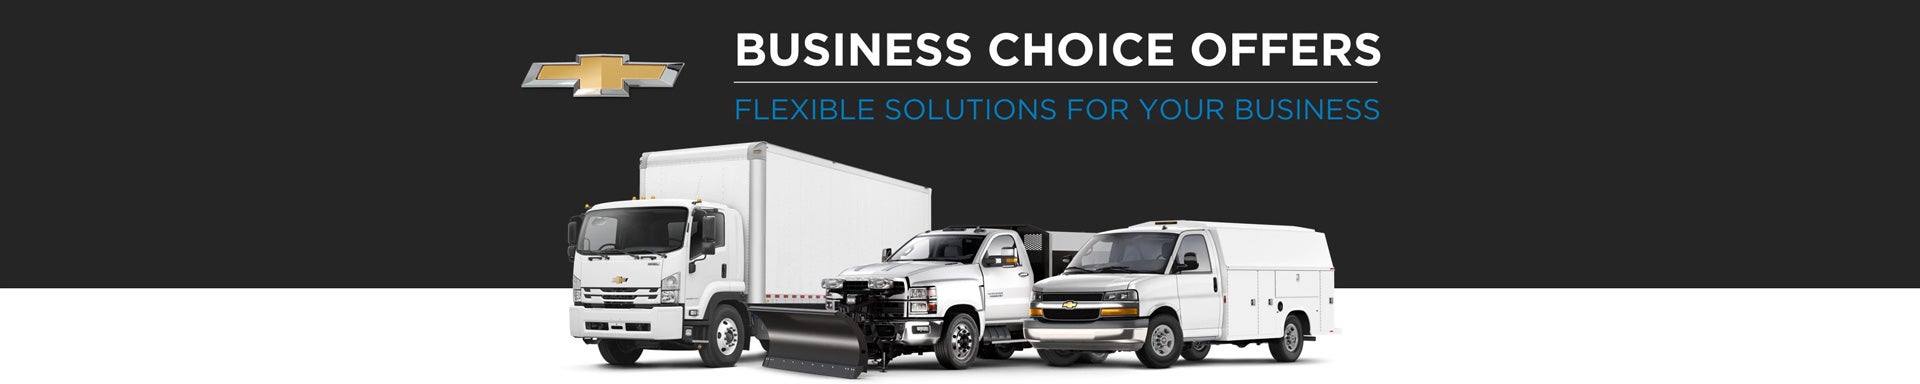 Chevrolet Business Choice Offers - Flexible Solutions for your Business - Monument Chevrolet in Pasadena TX